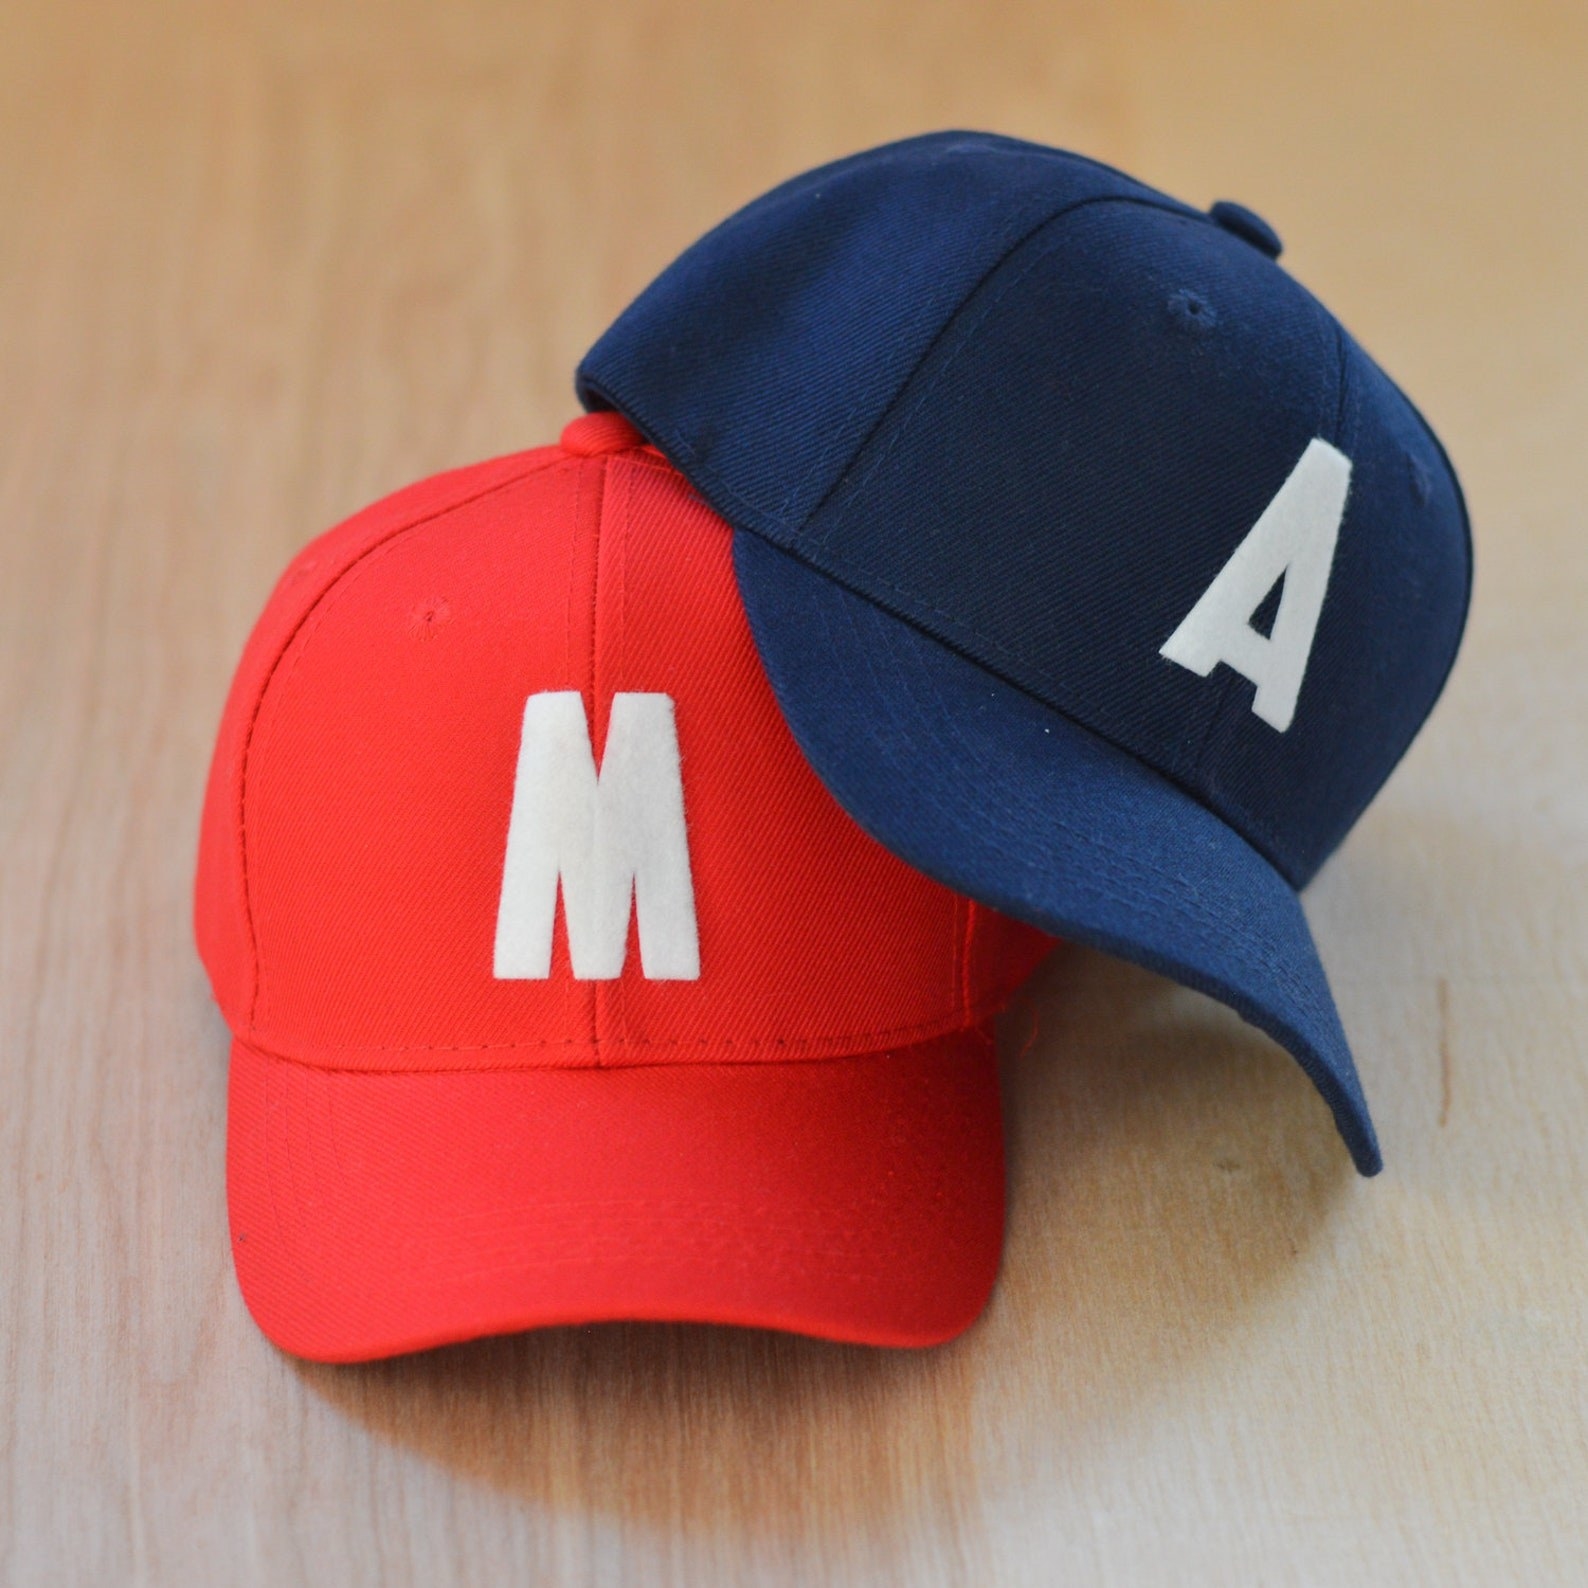 Red and navy baseball caps with single white block letters